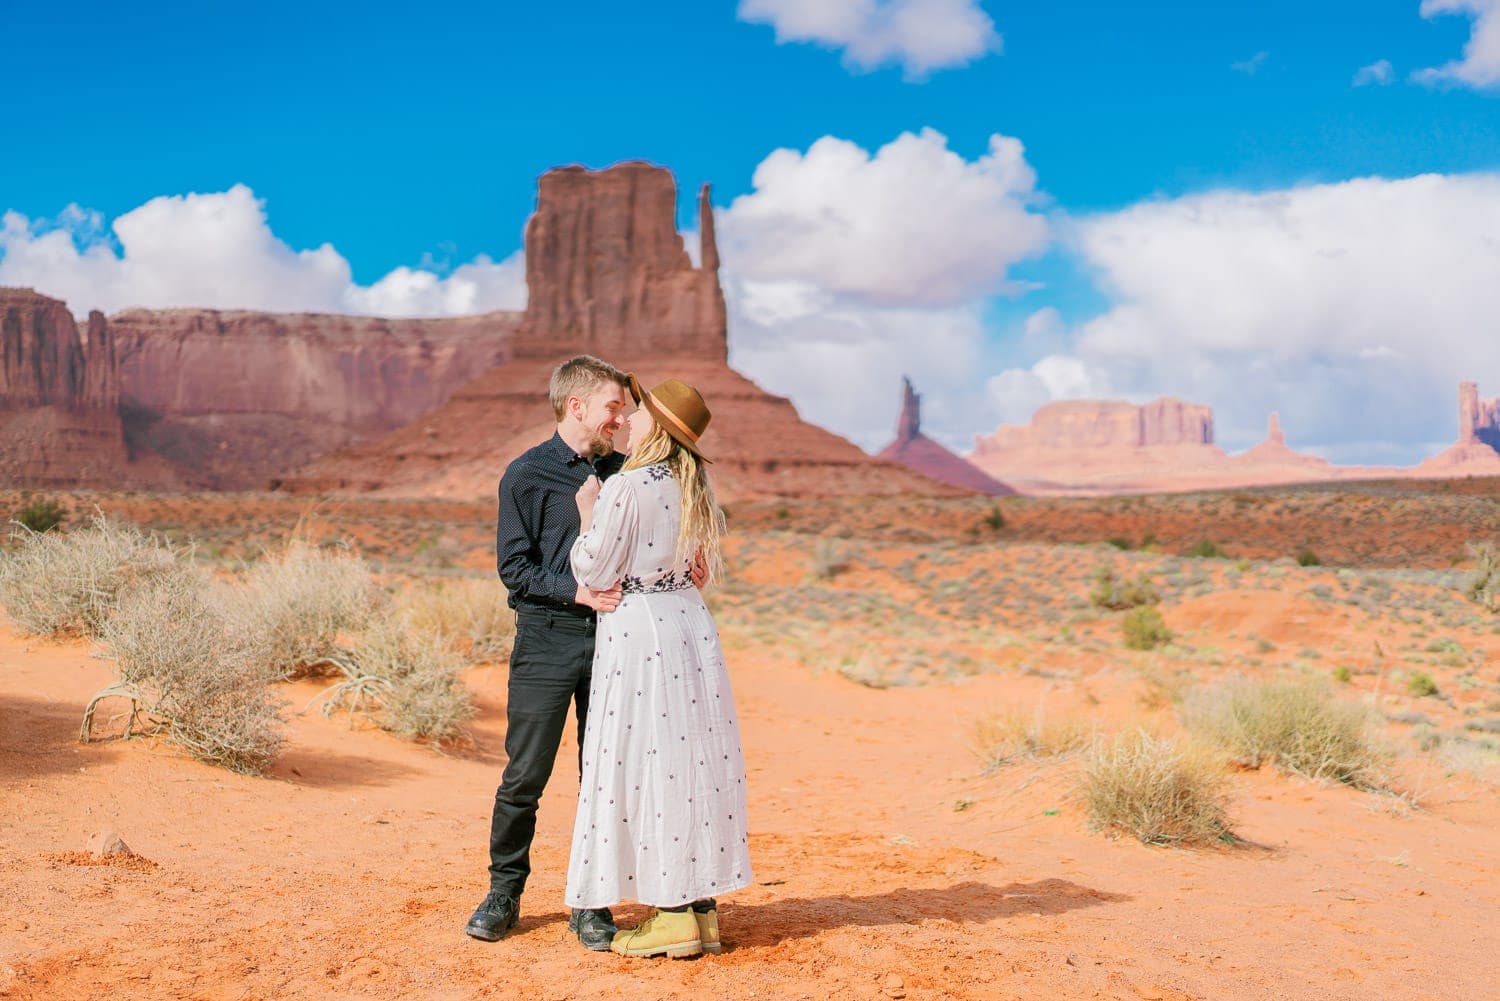 elopement in Moab, UT by Malachi Lewis at Shell Creek Photography